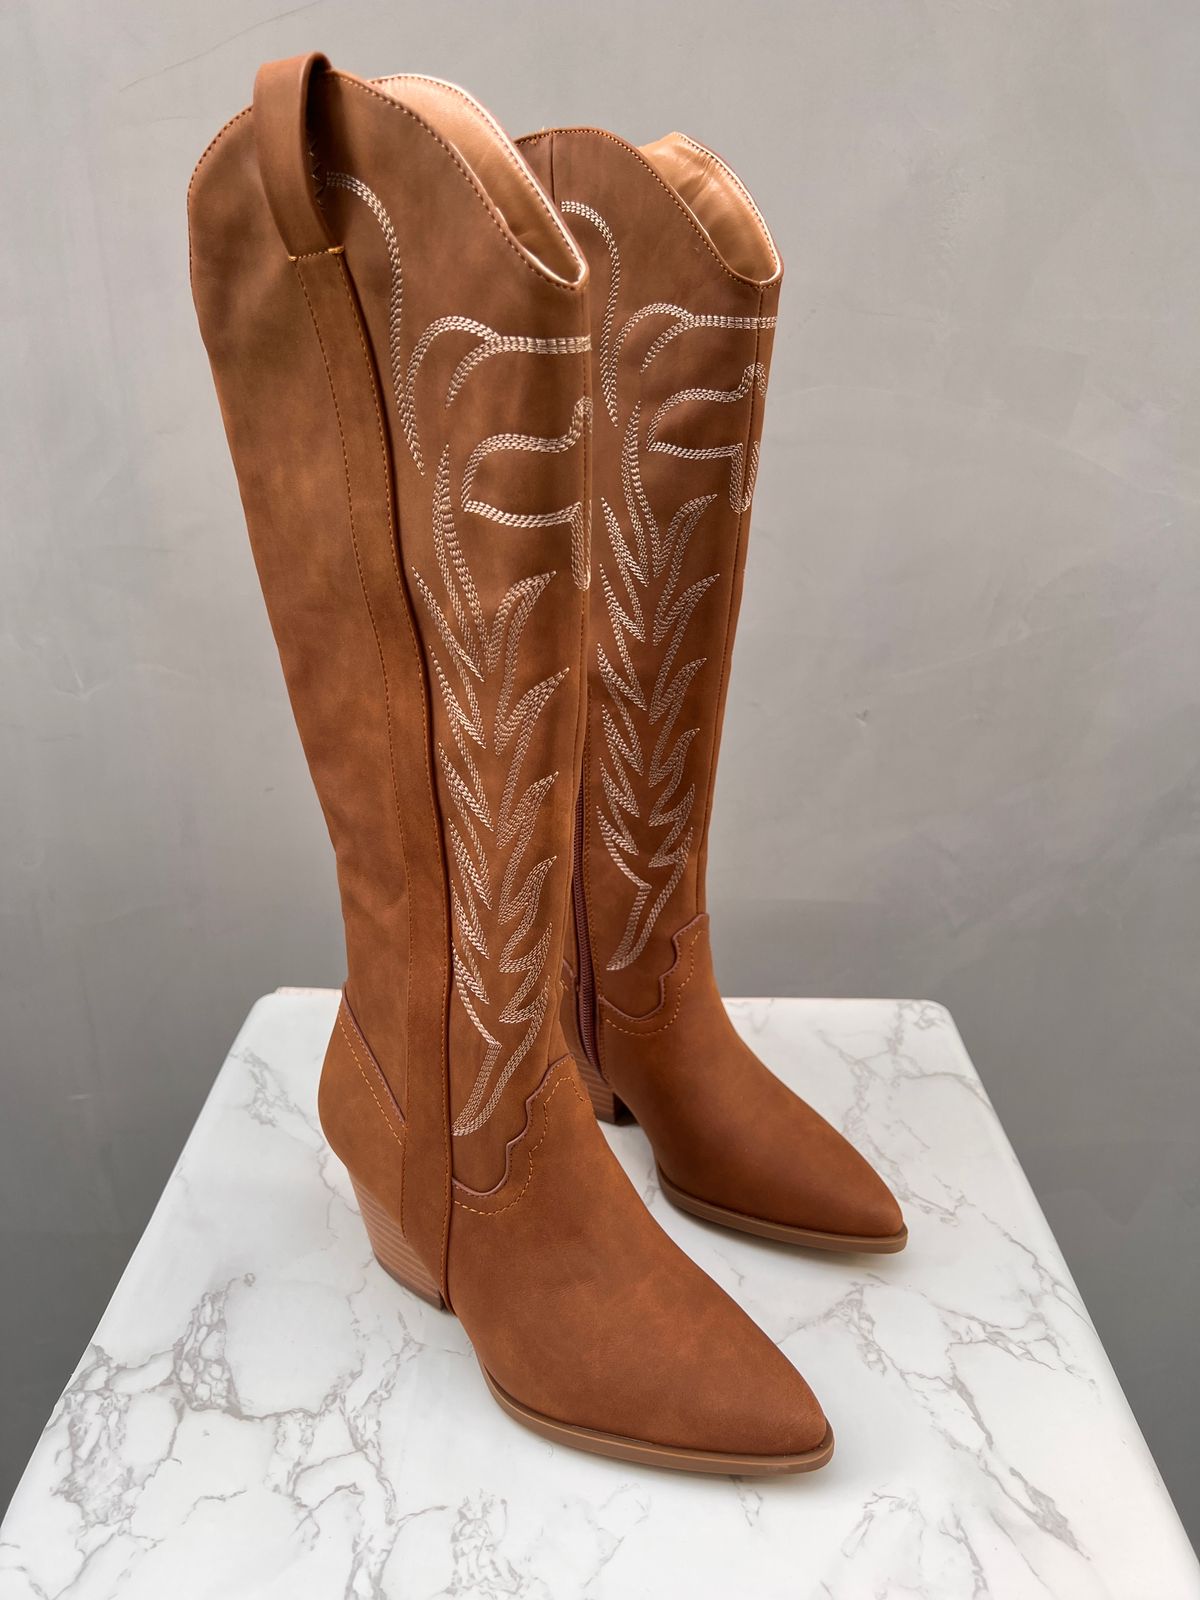 LONG COWGiRL 🤠 BOOTS